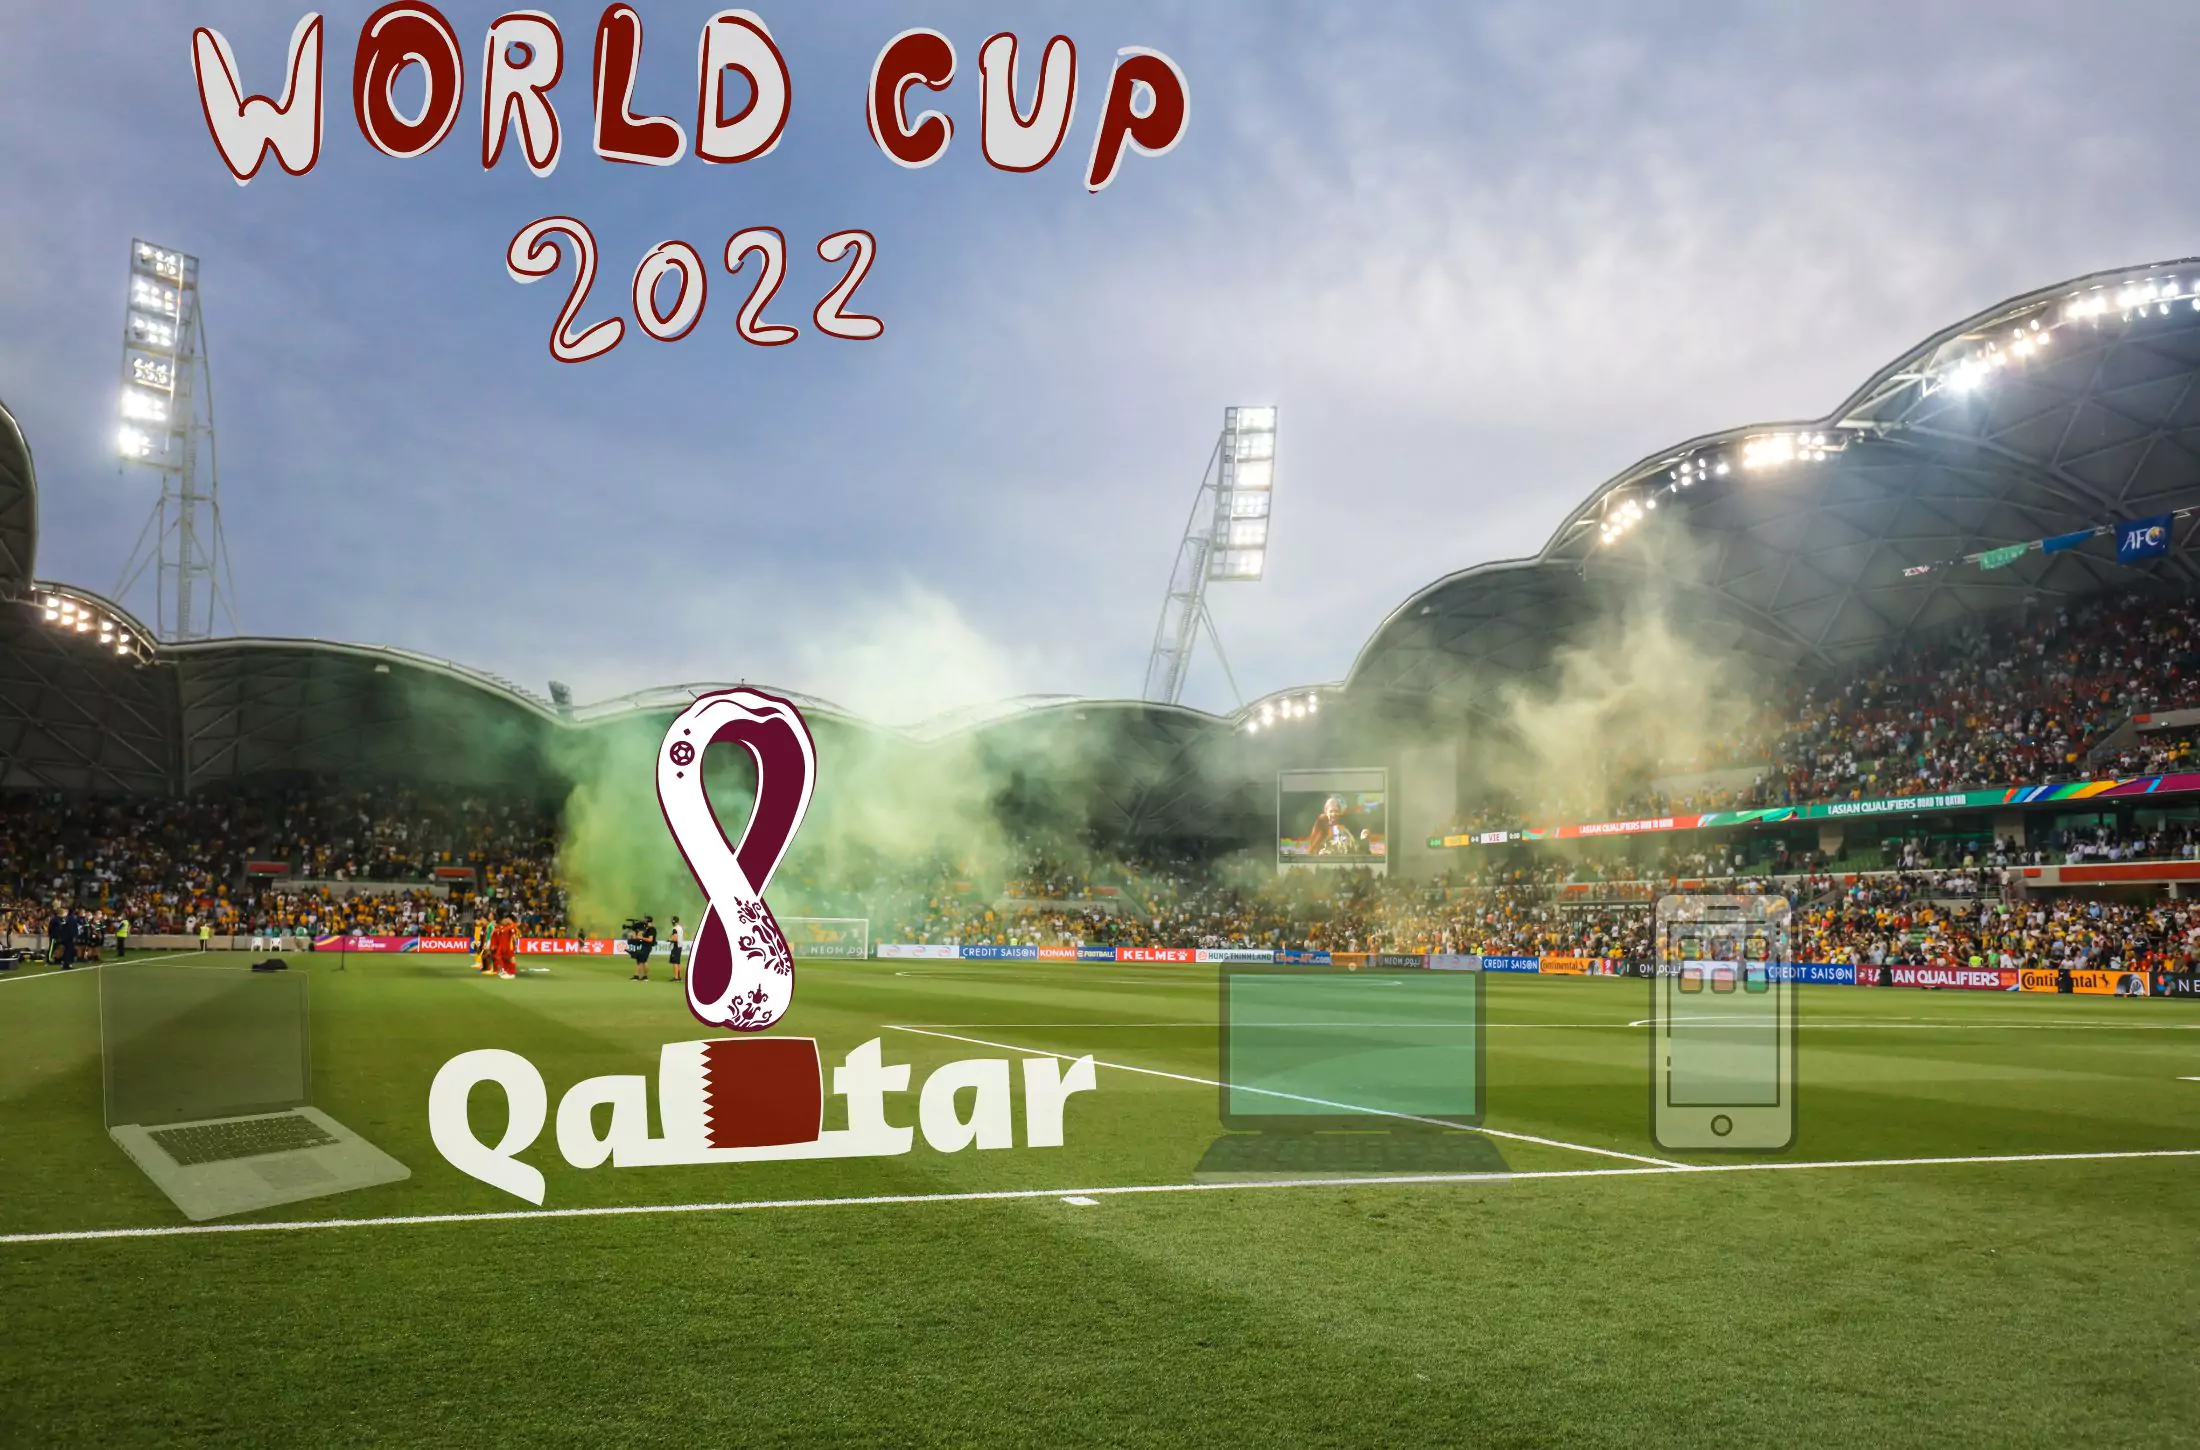 How to Watch FIFA World Cup 2022 on Mac, iPhone, iPad - HowToiSolve